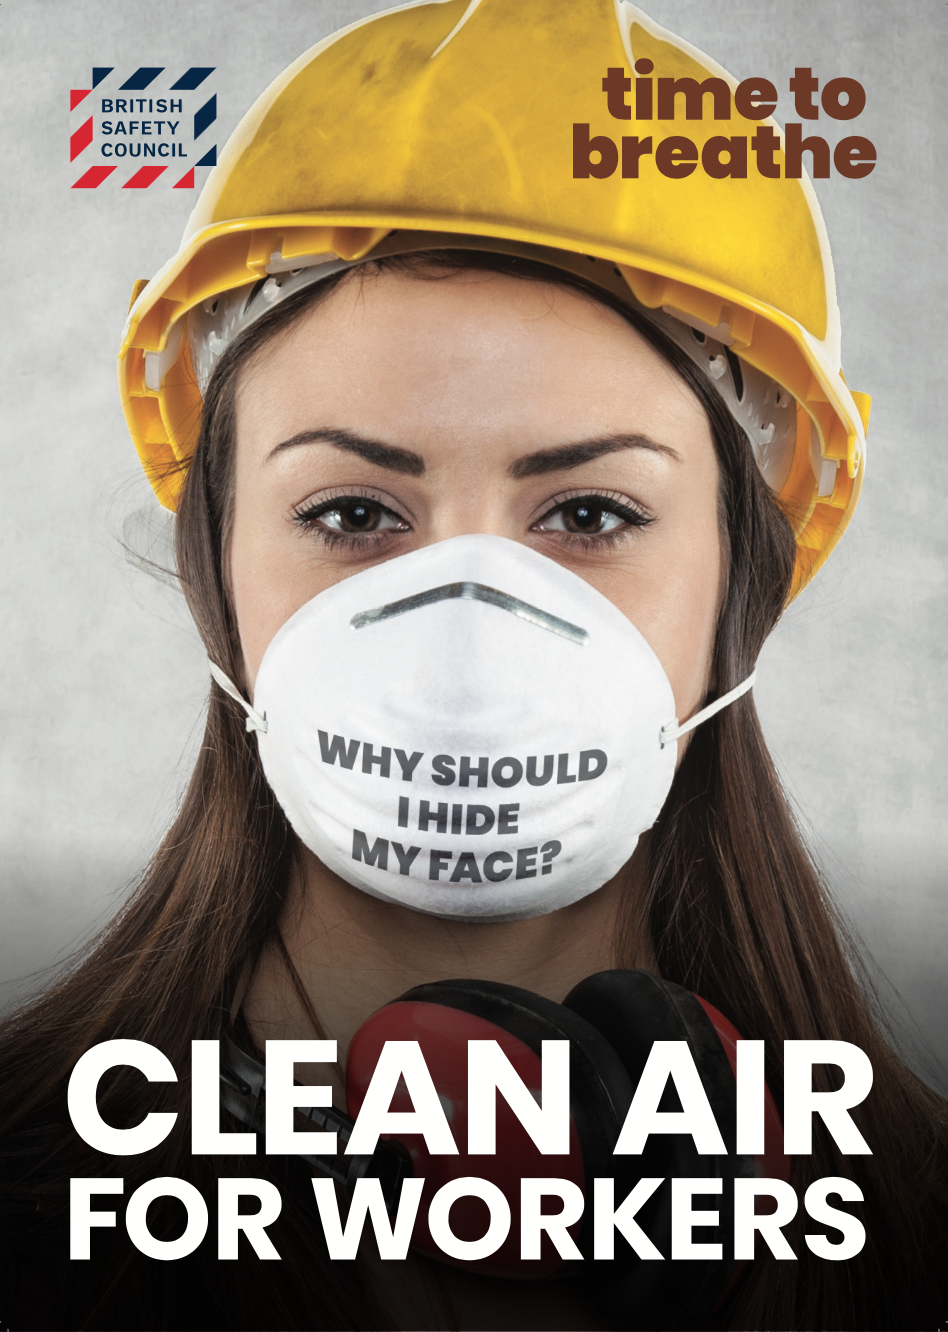 The British Safety Council's Time to Breathe campaign poster.